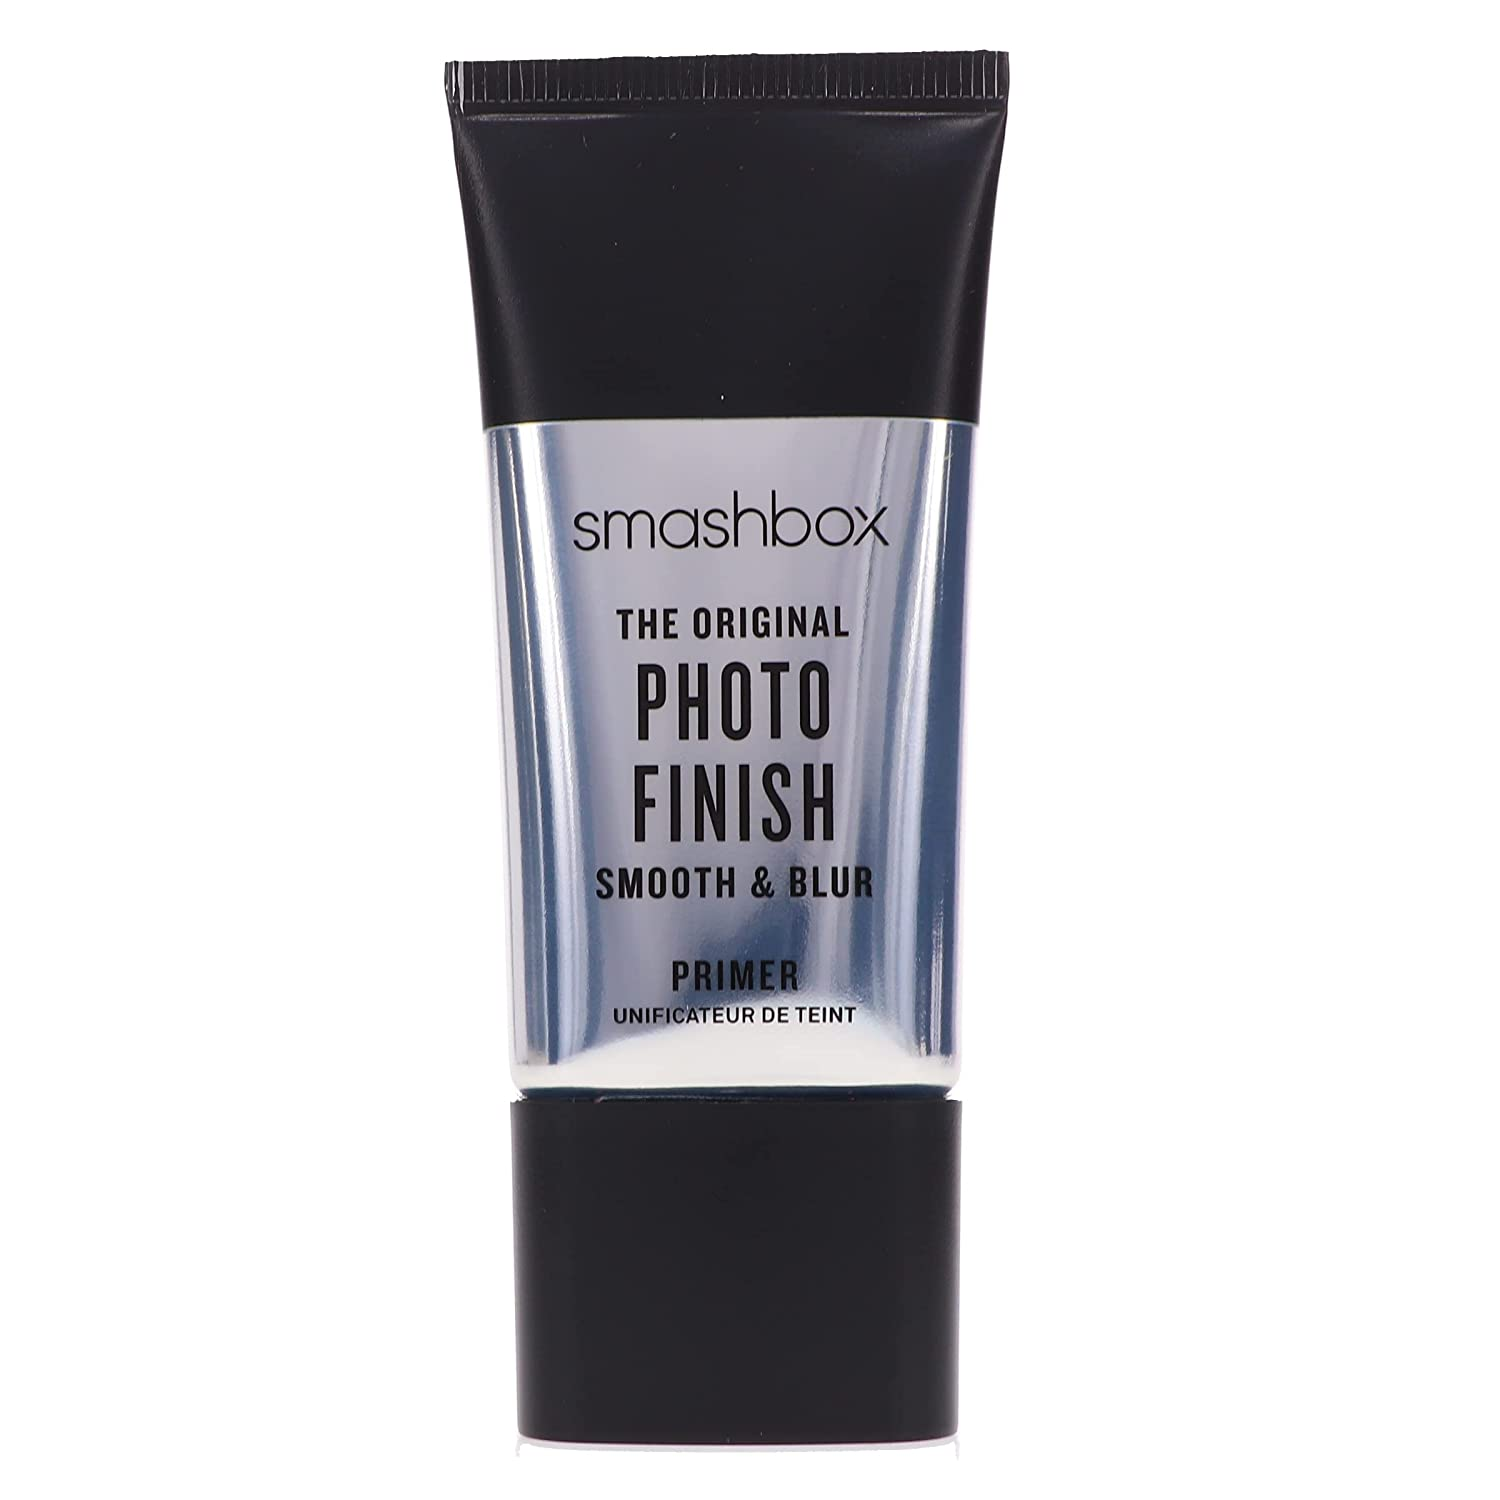 Smashbox Photo Finish Smooth & Blur Oil free Foundation Primer reduces the appearance of fine lines and pores, giving you a flawless yet natural finish.